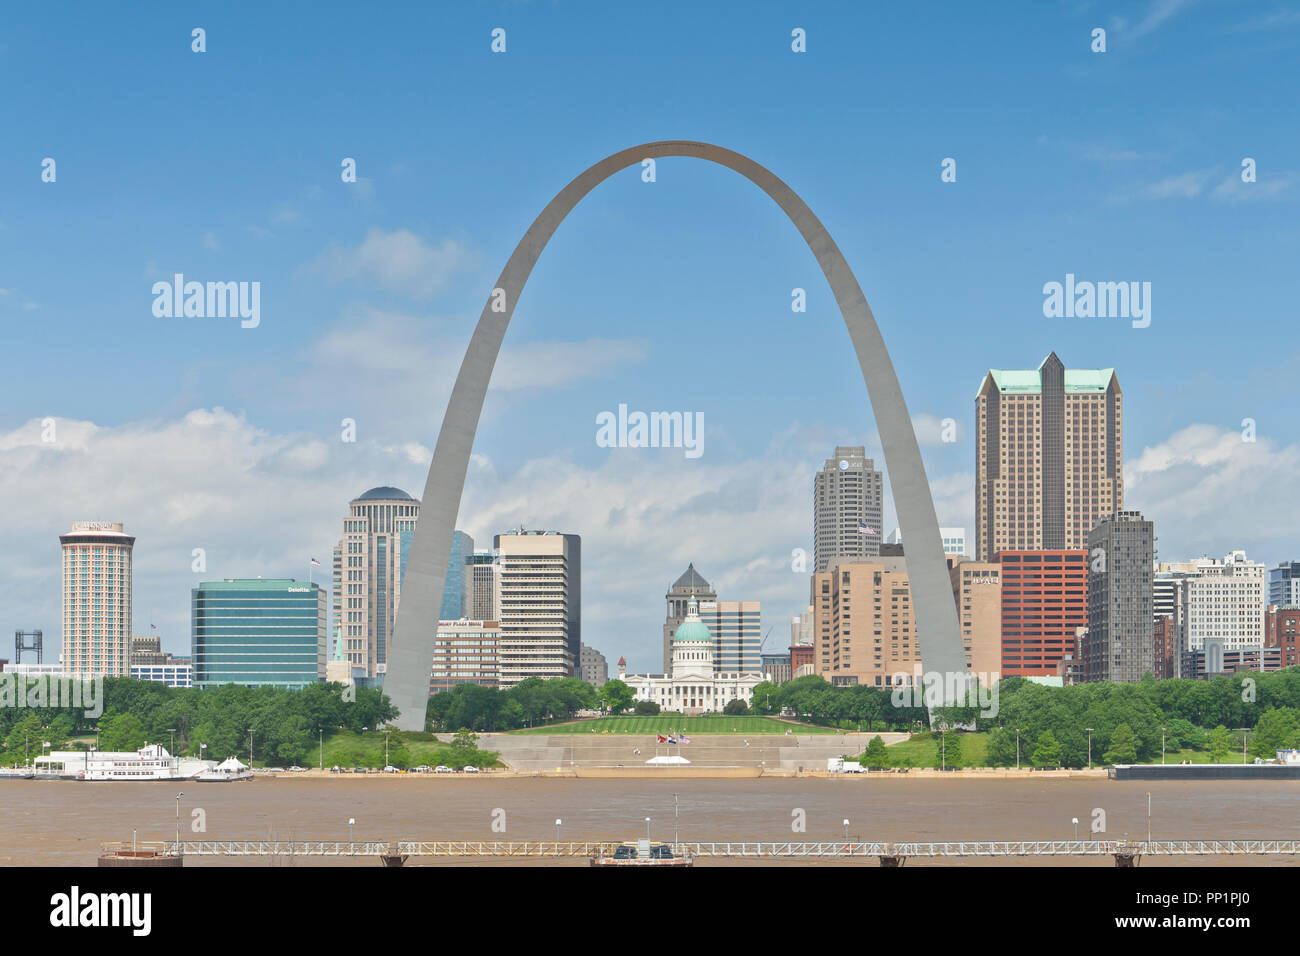 The Gateway Arch and the Downtown St. Louis skyline seen from the Mississippi River Overlook in Malcolm W. Martin Memorial Park. Stock Photo